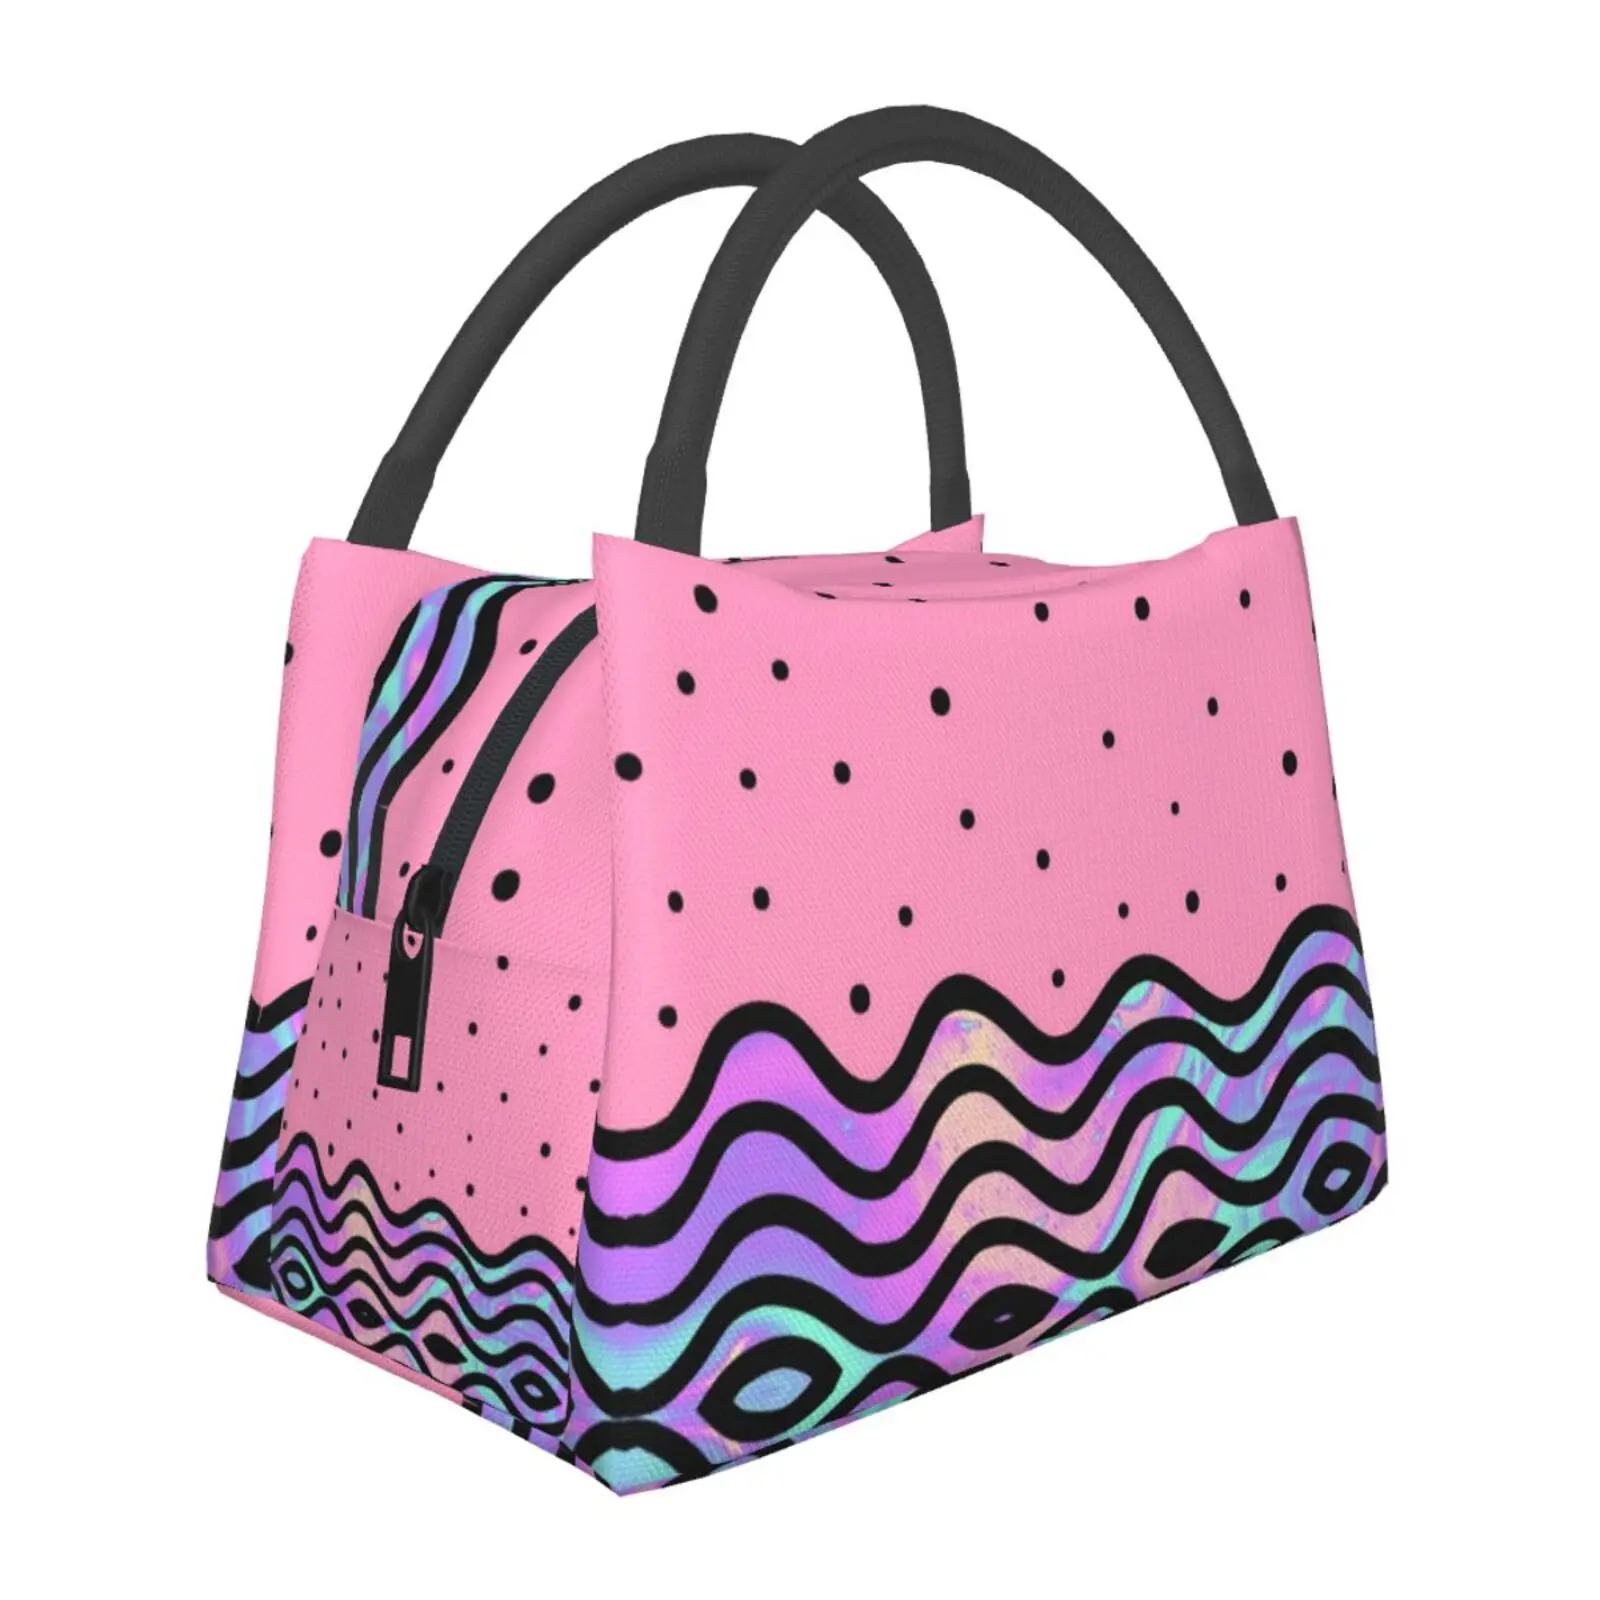 Polka Dots and Corrugation Lunch Bag Bento Insulated Bag Cooler Bags for Kids Women Tote Bag for Outdoor Shcool Work Picnic